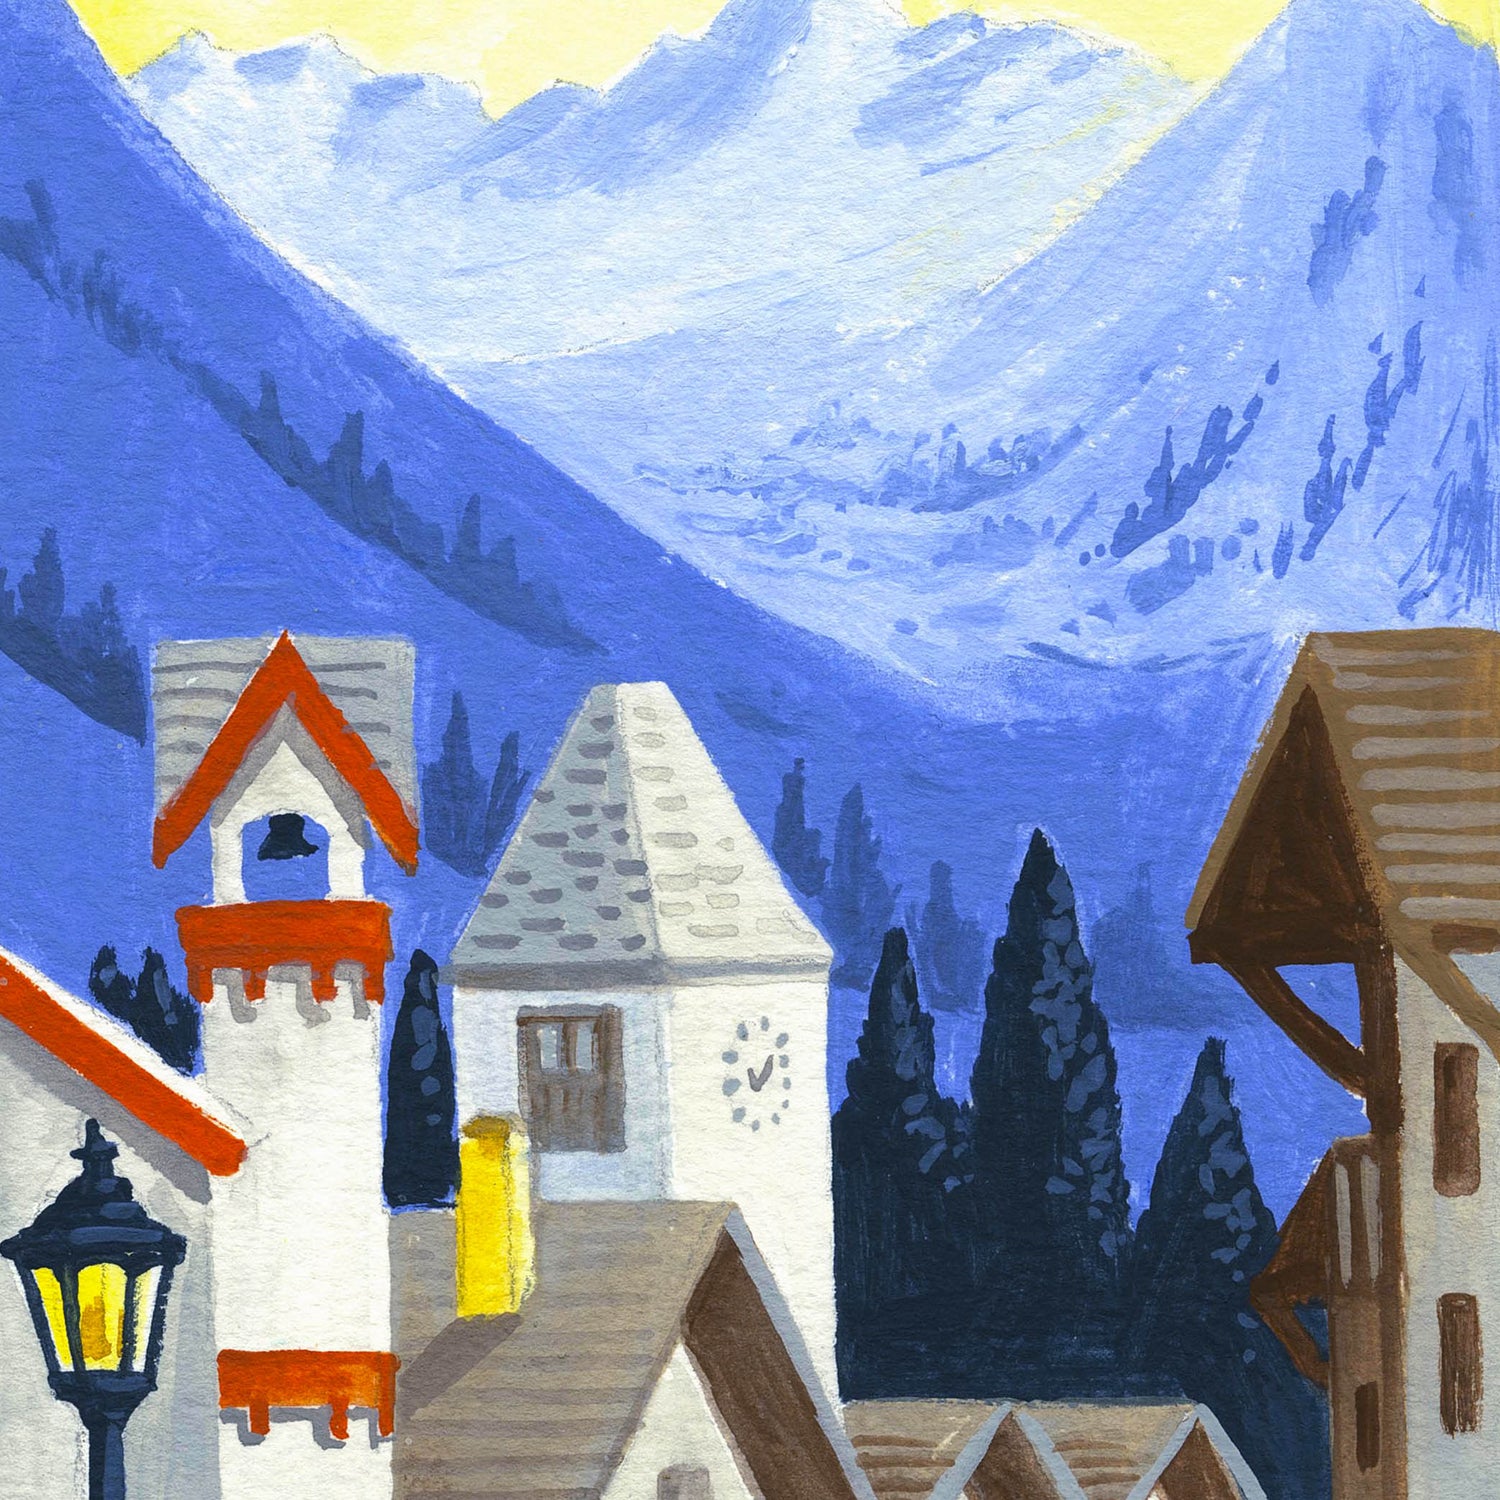 Vail art detail with Vail Village, ski resort, and mountains; trendy illustration by Angela Staehling